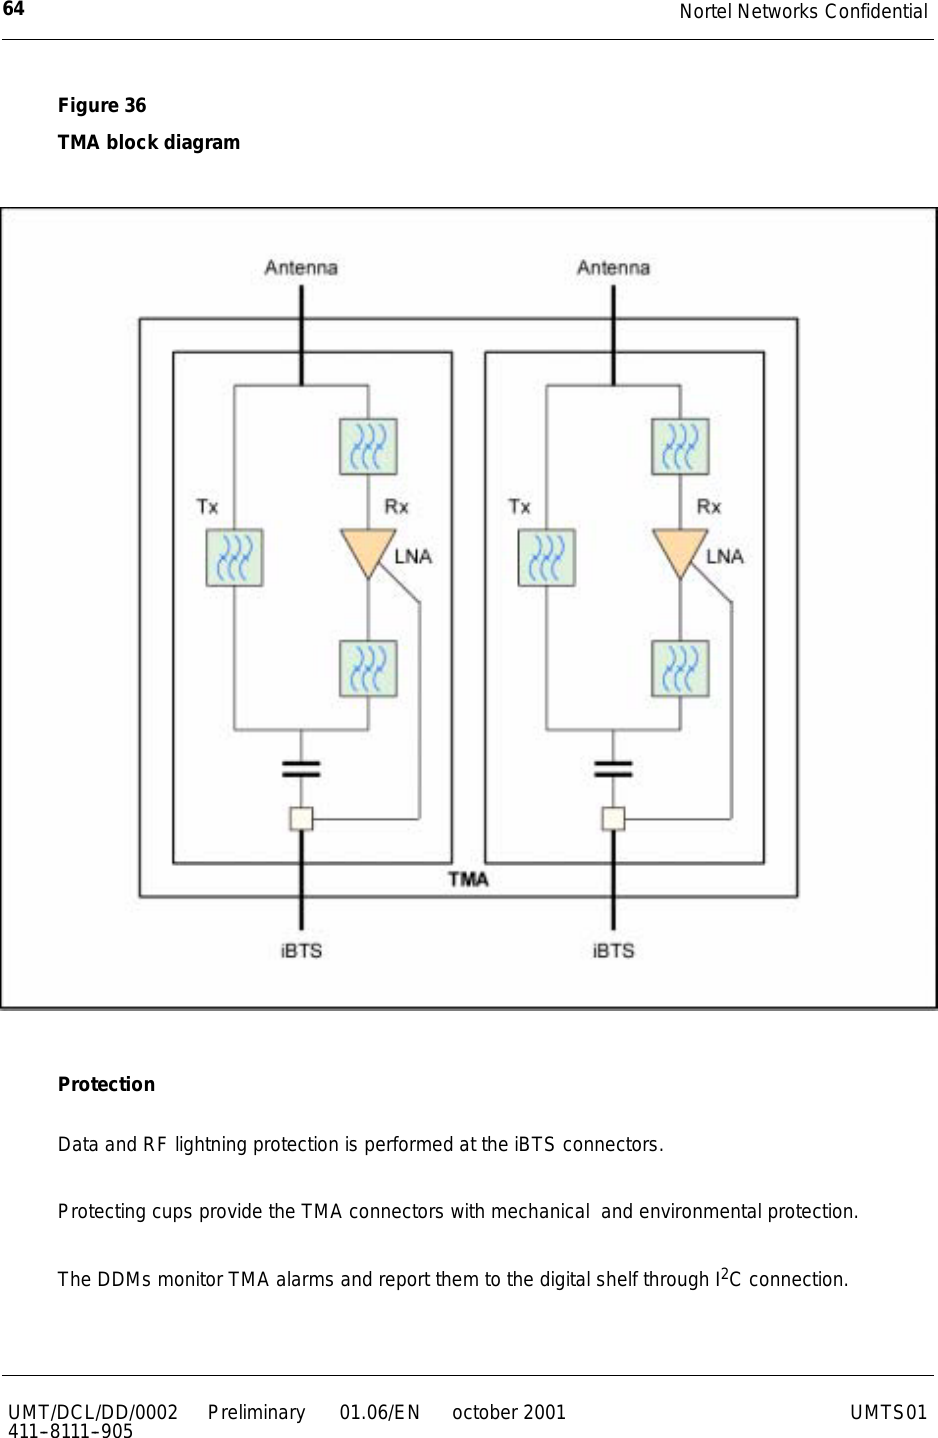 Nortel Networks Confidential64UMT/DCL/DD/0002411--8111--905 Preliminary 01.06/EN october 2001 UMTS01Figure 36TMA block diagramProtectionData and RF lightning protection is performed at the iBTS connectors.Protecting cups provide the TMA connectors with mechanical and environmental protection.The DDMs monitor TMA alarms and report them to the digital shelf through I2C connection.